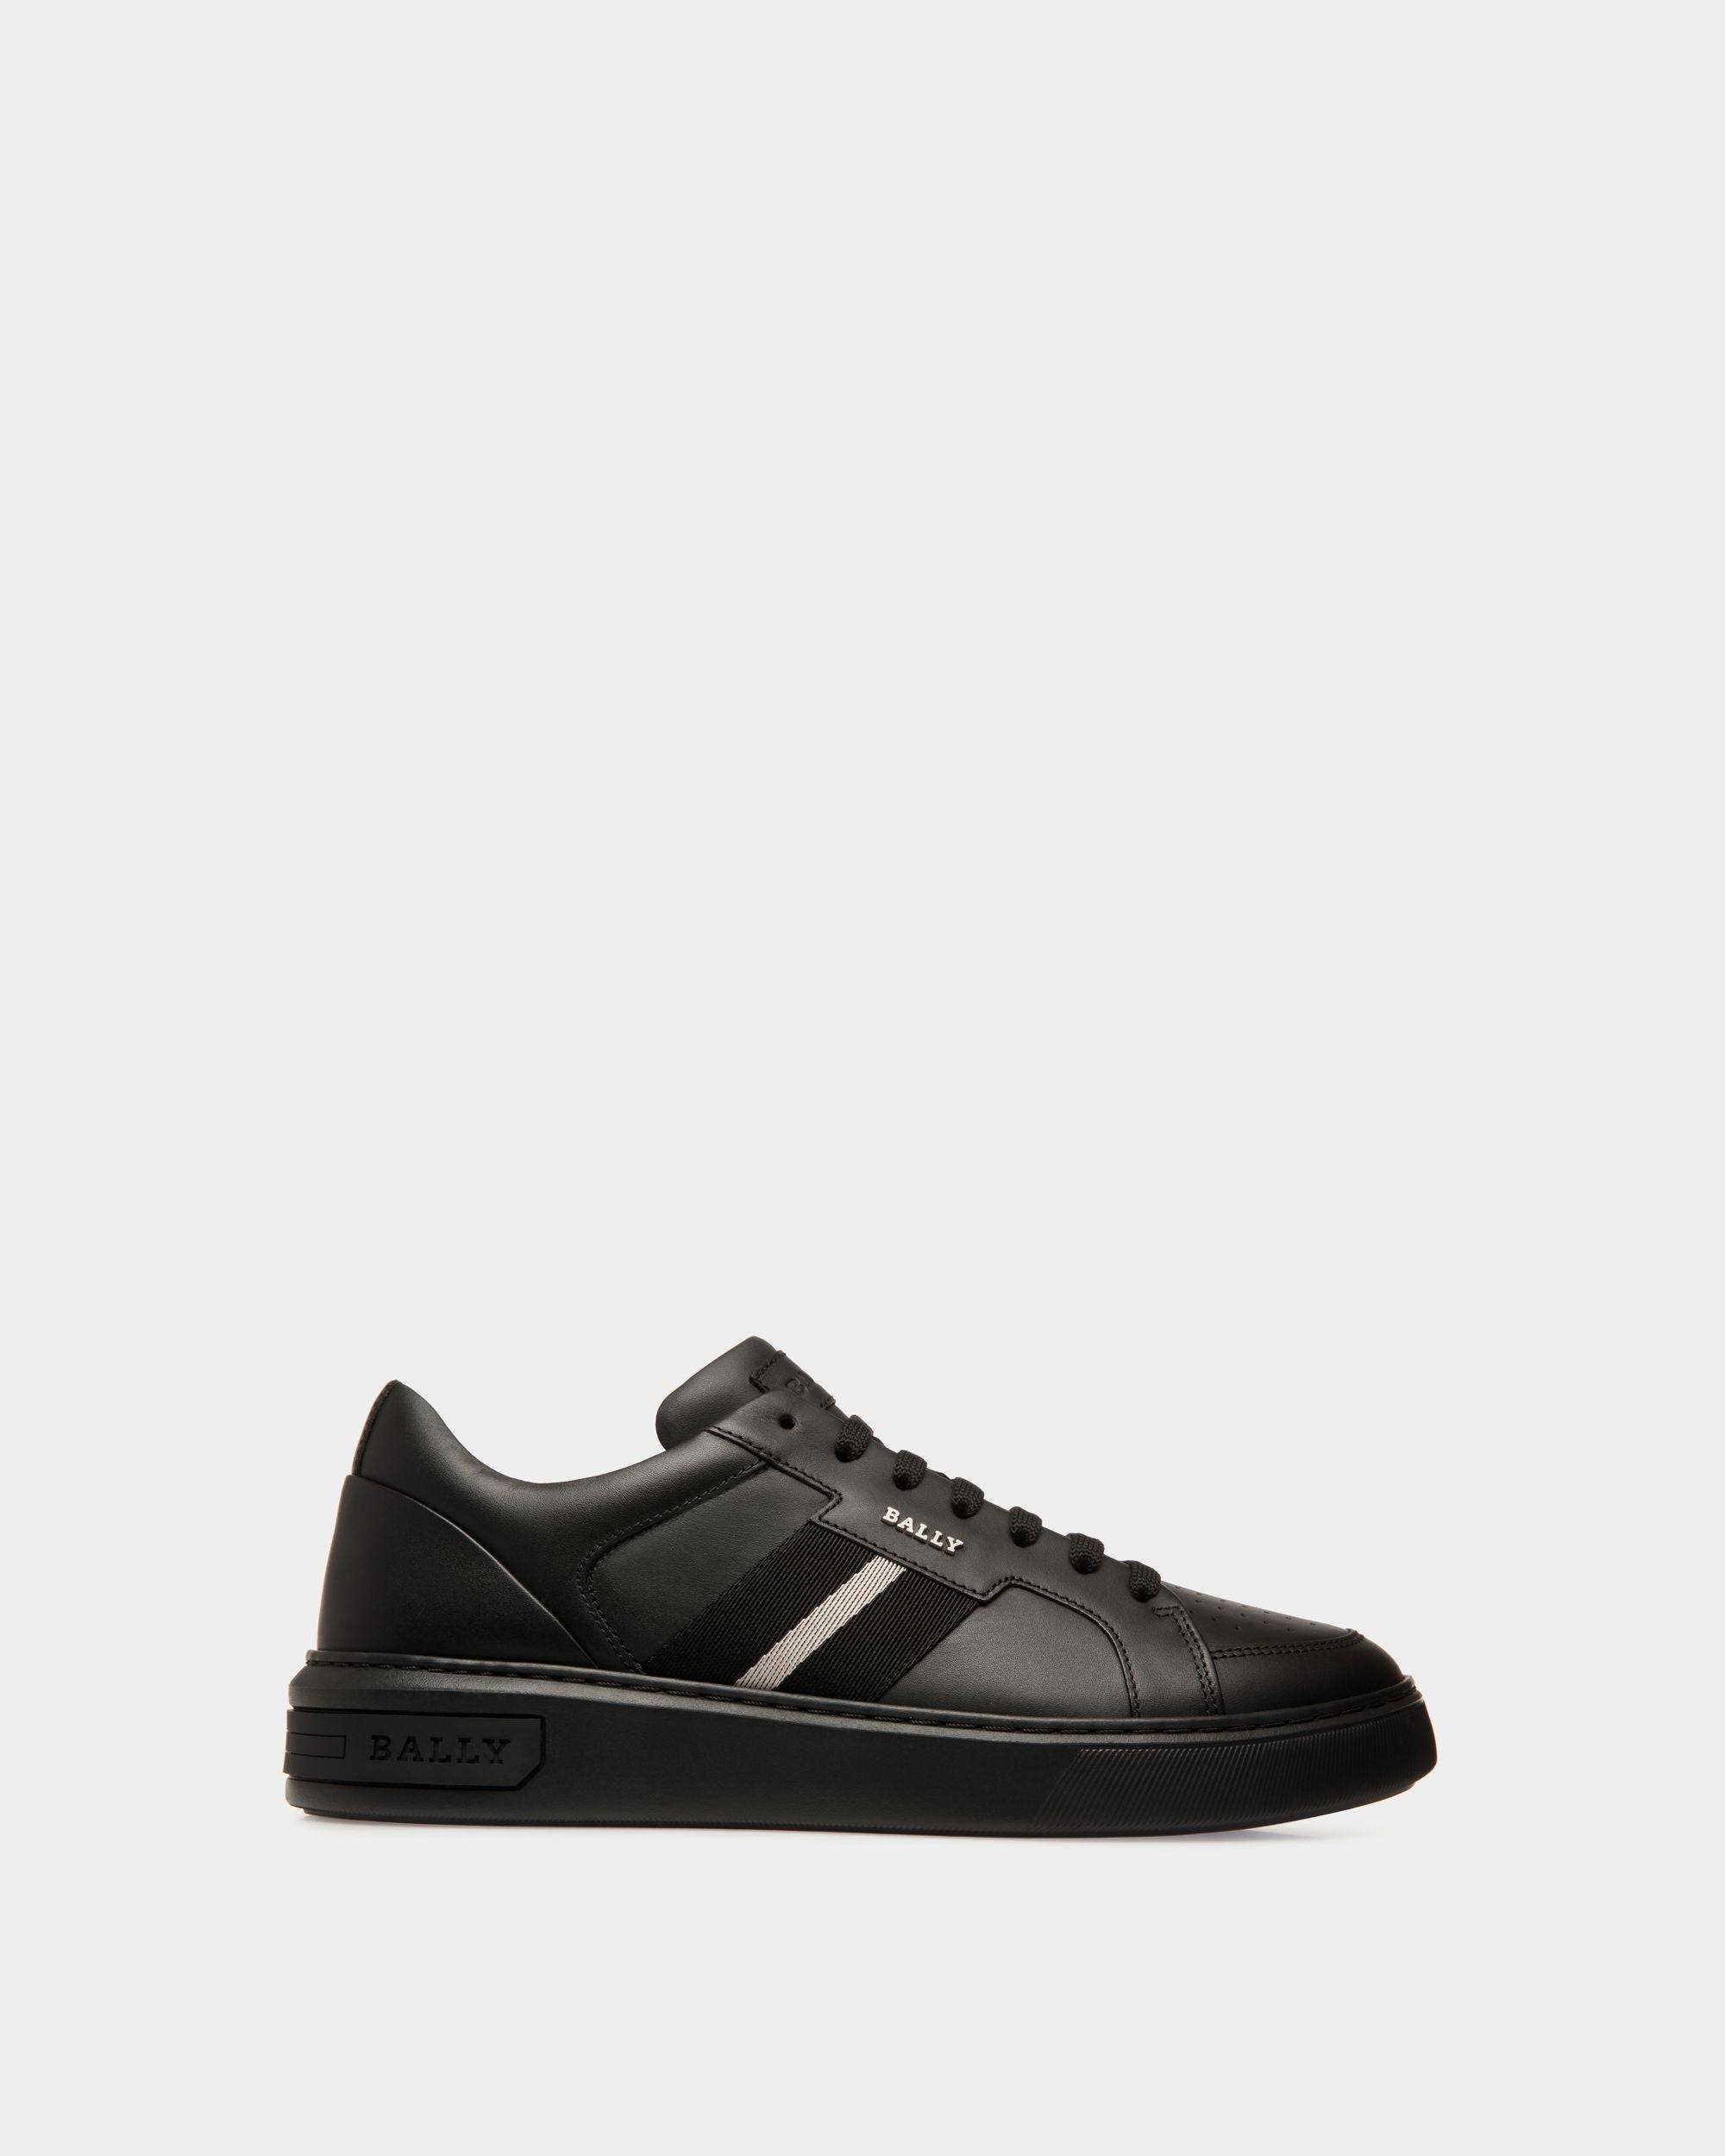 Bally Men's Gavino Black Leather Sneakers | World of Watches